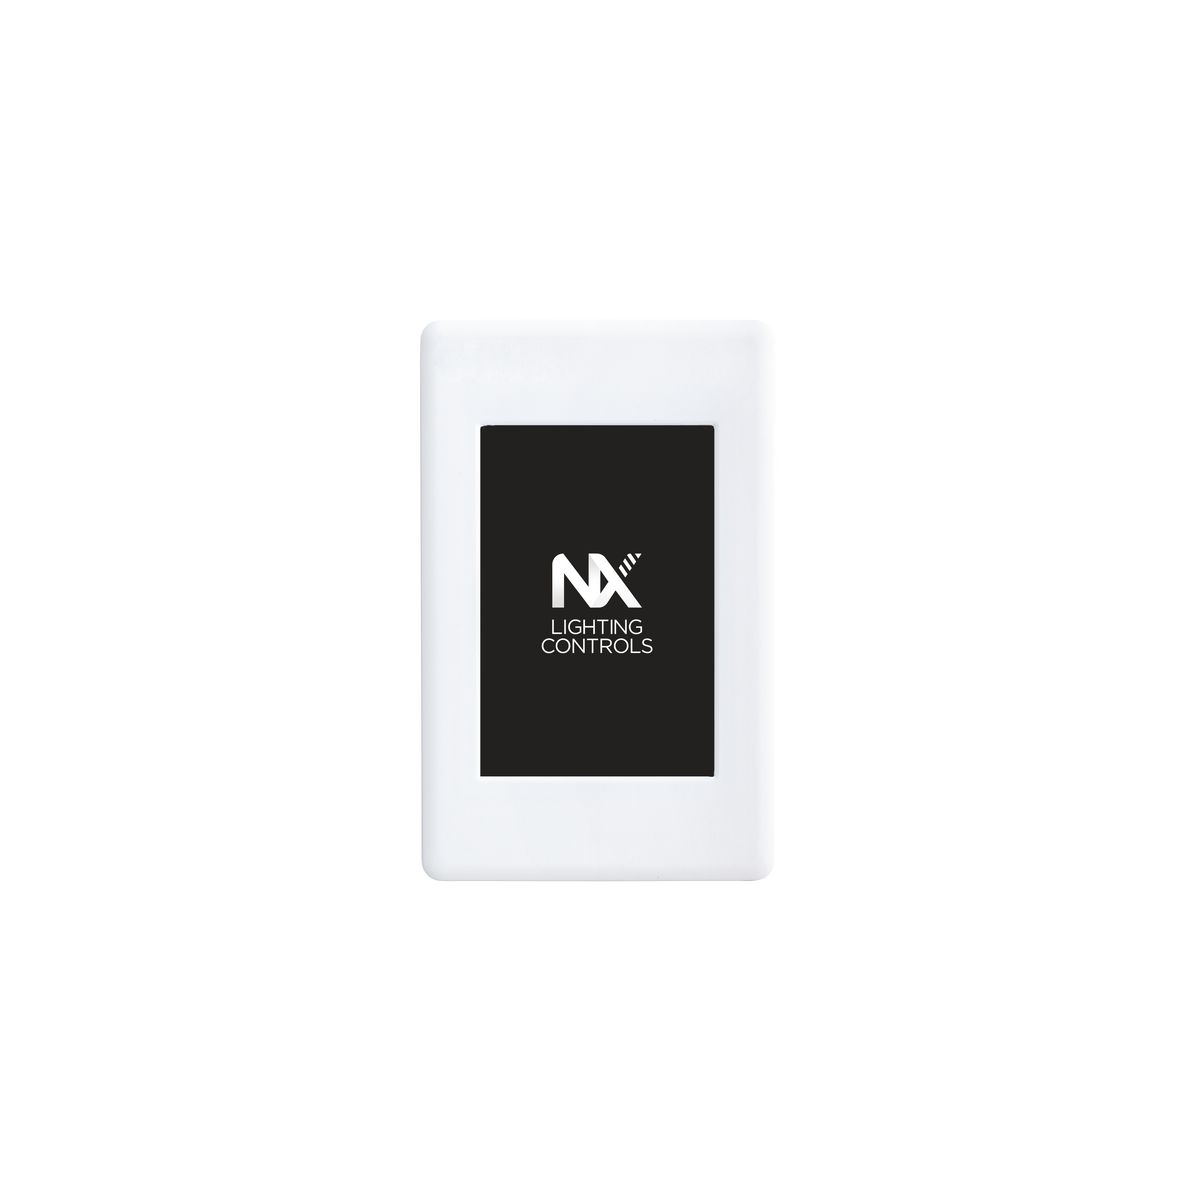 NX SIMPLE TOUCH WALL STATION, WHITE